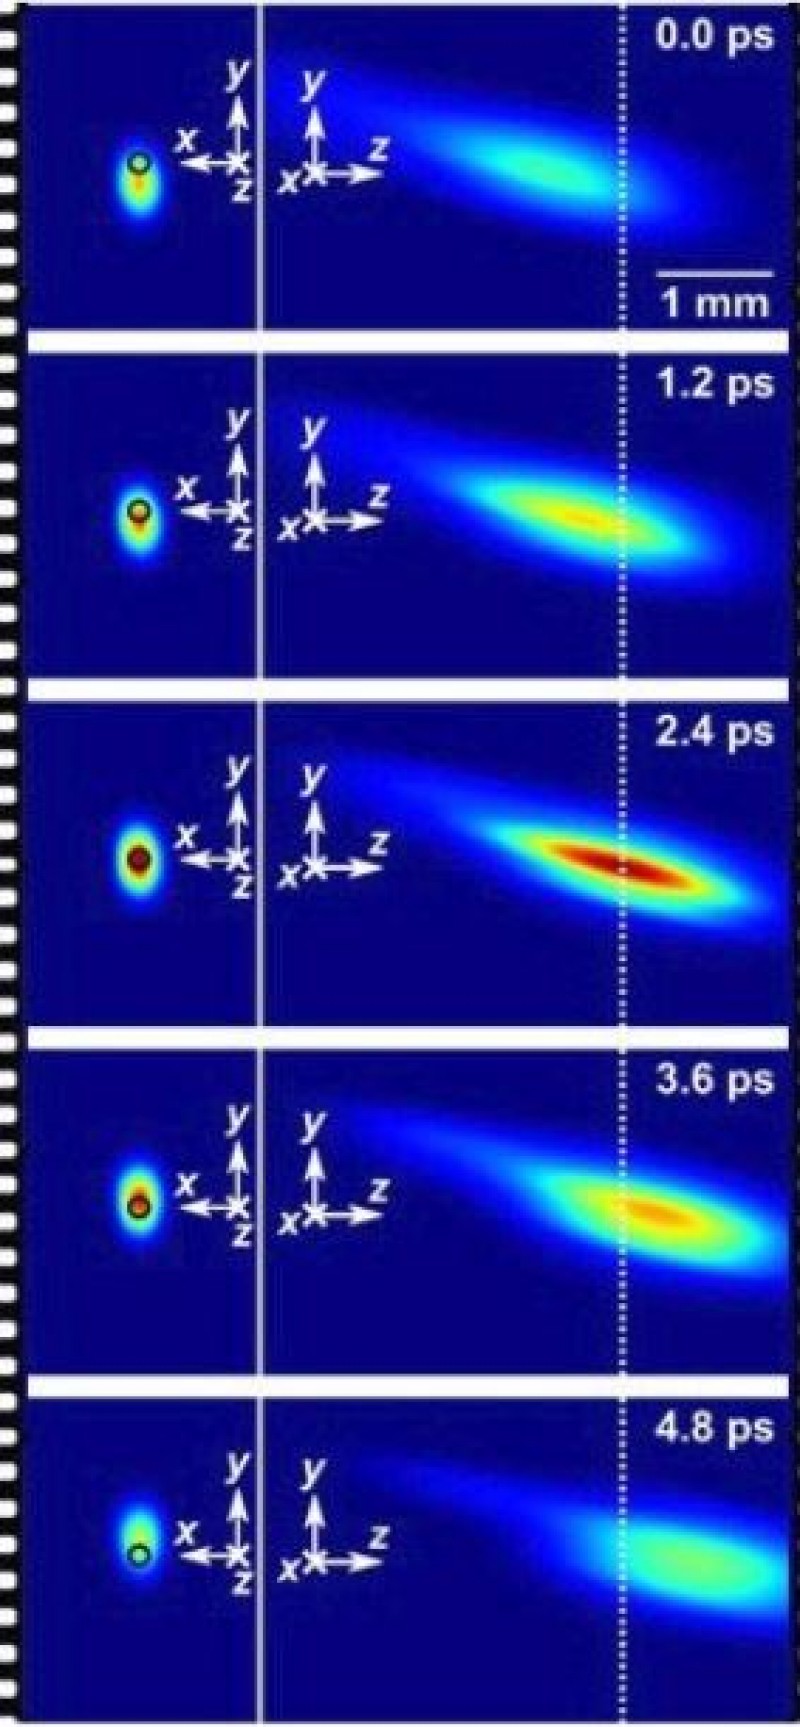 10 Trillion Frame-per-Second Camera Captures Photon Pulses in Mid-Air